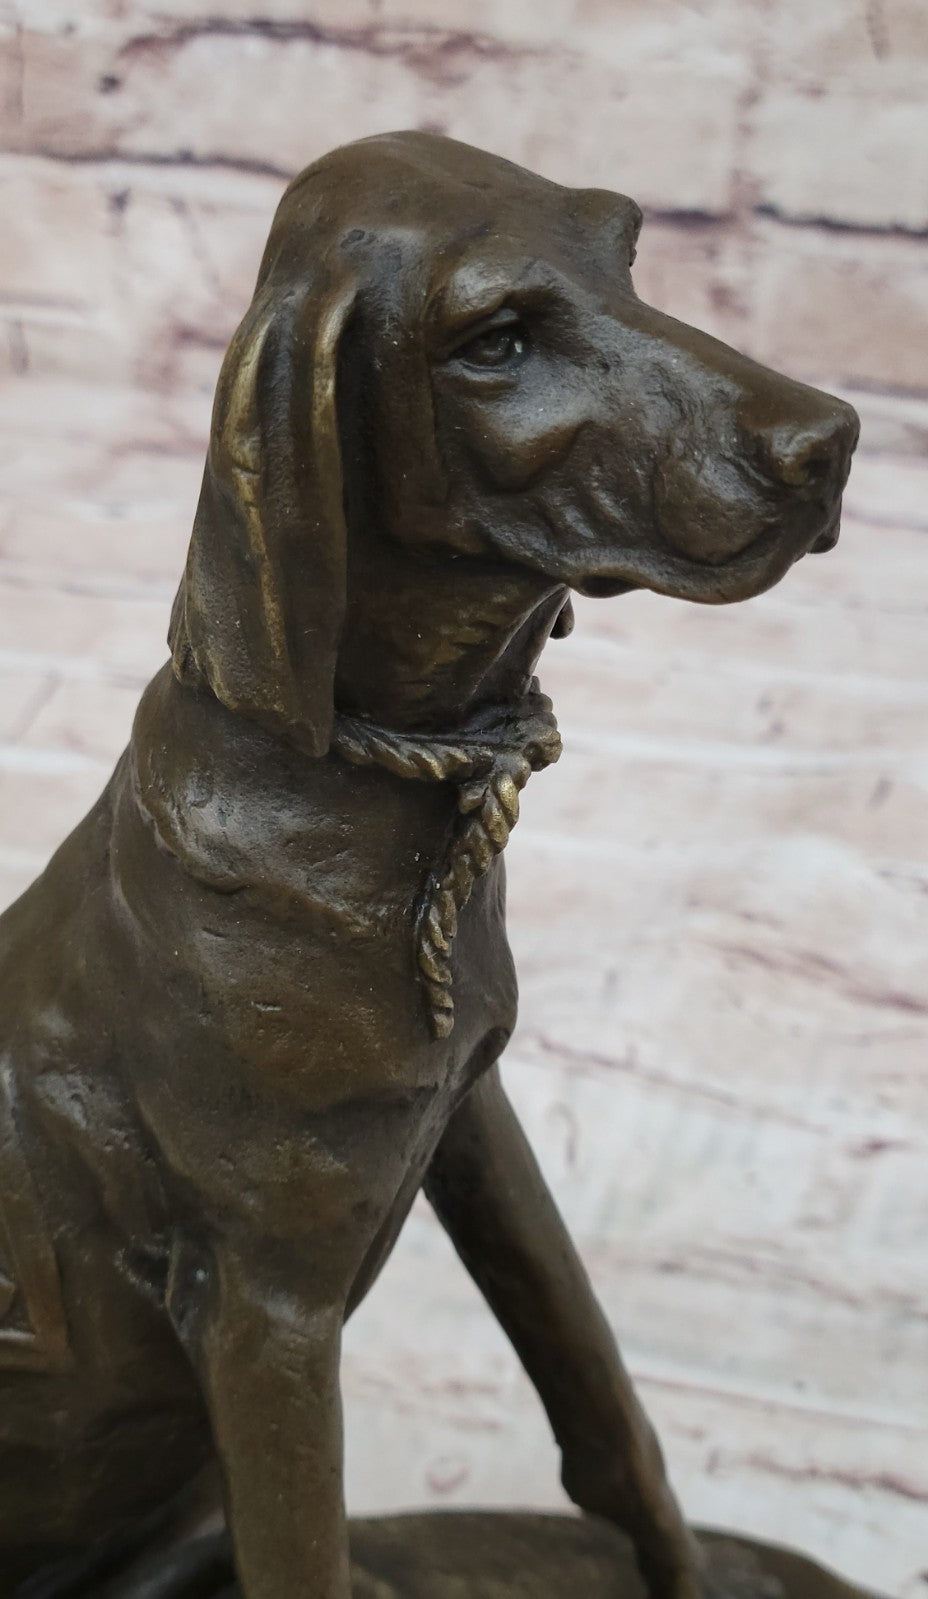 Vintage Bassett Hound Dog Figurine on Base Heavy Bronze  Made in Europe By Cail